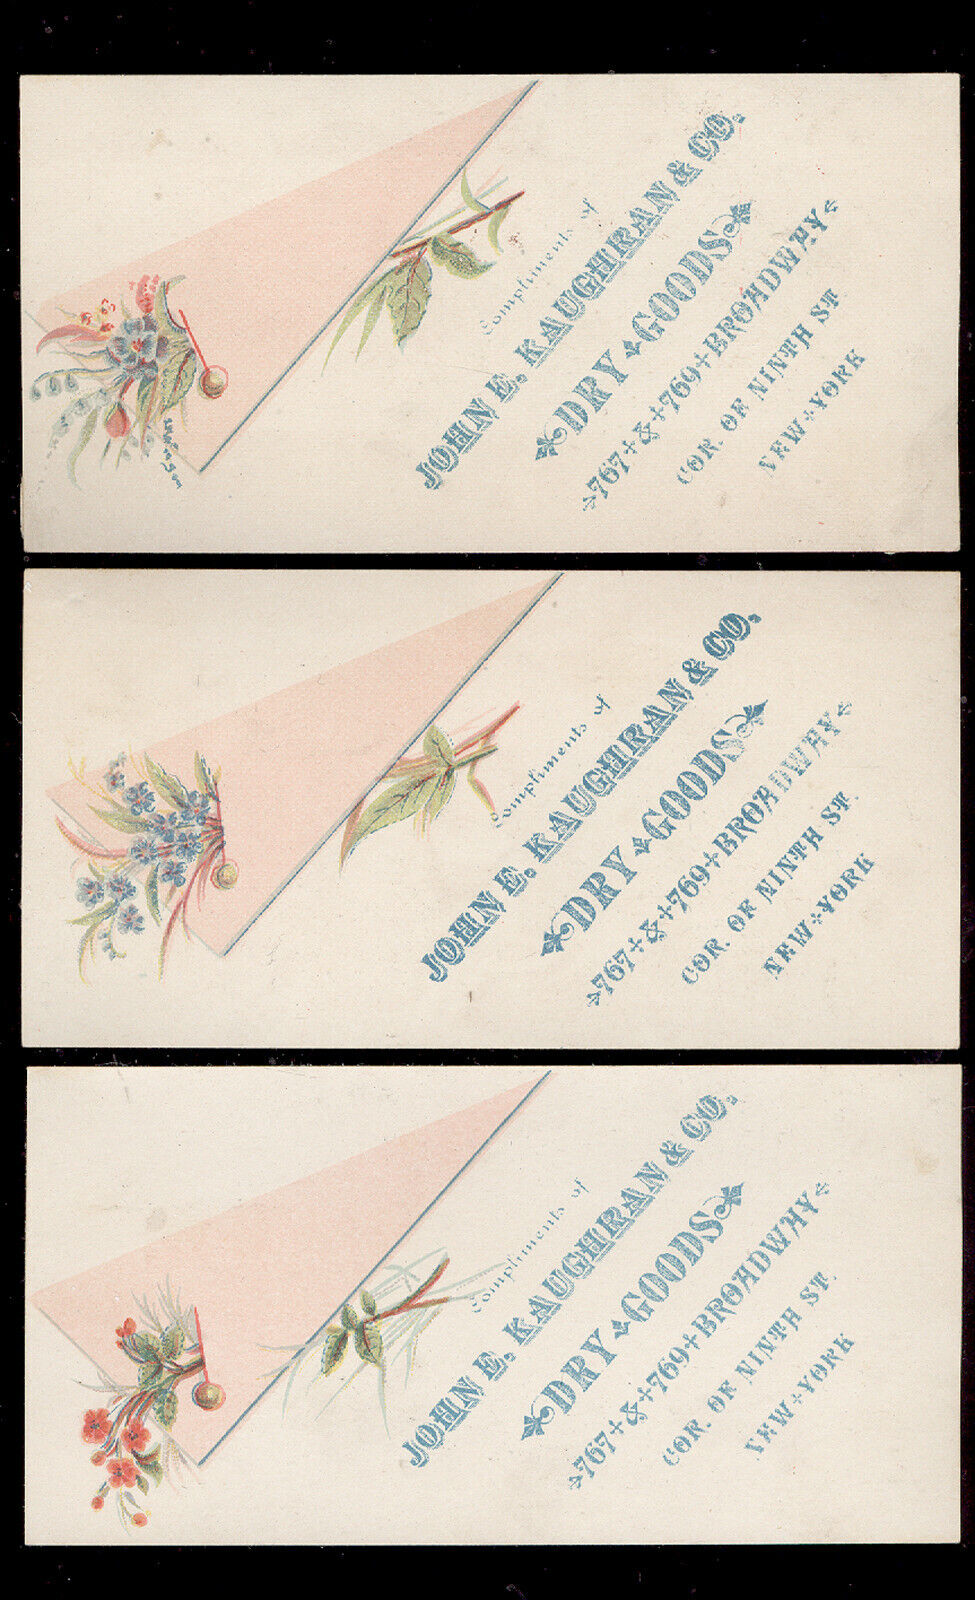 NYC 3 TRADE CARDS,J E KAUGHRAN & CO DRY GOODS, 767~769 BROADWAY cor 9th St  A888